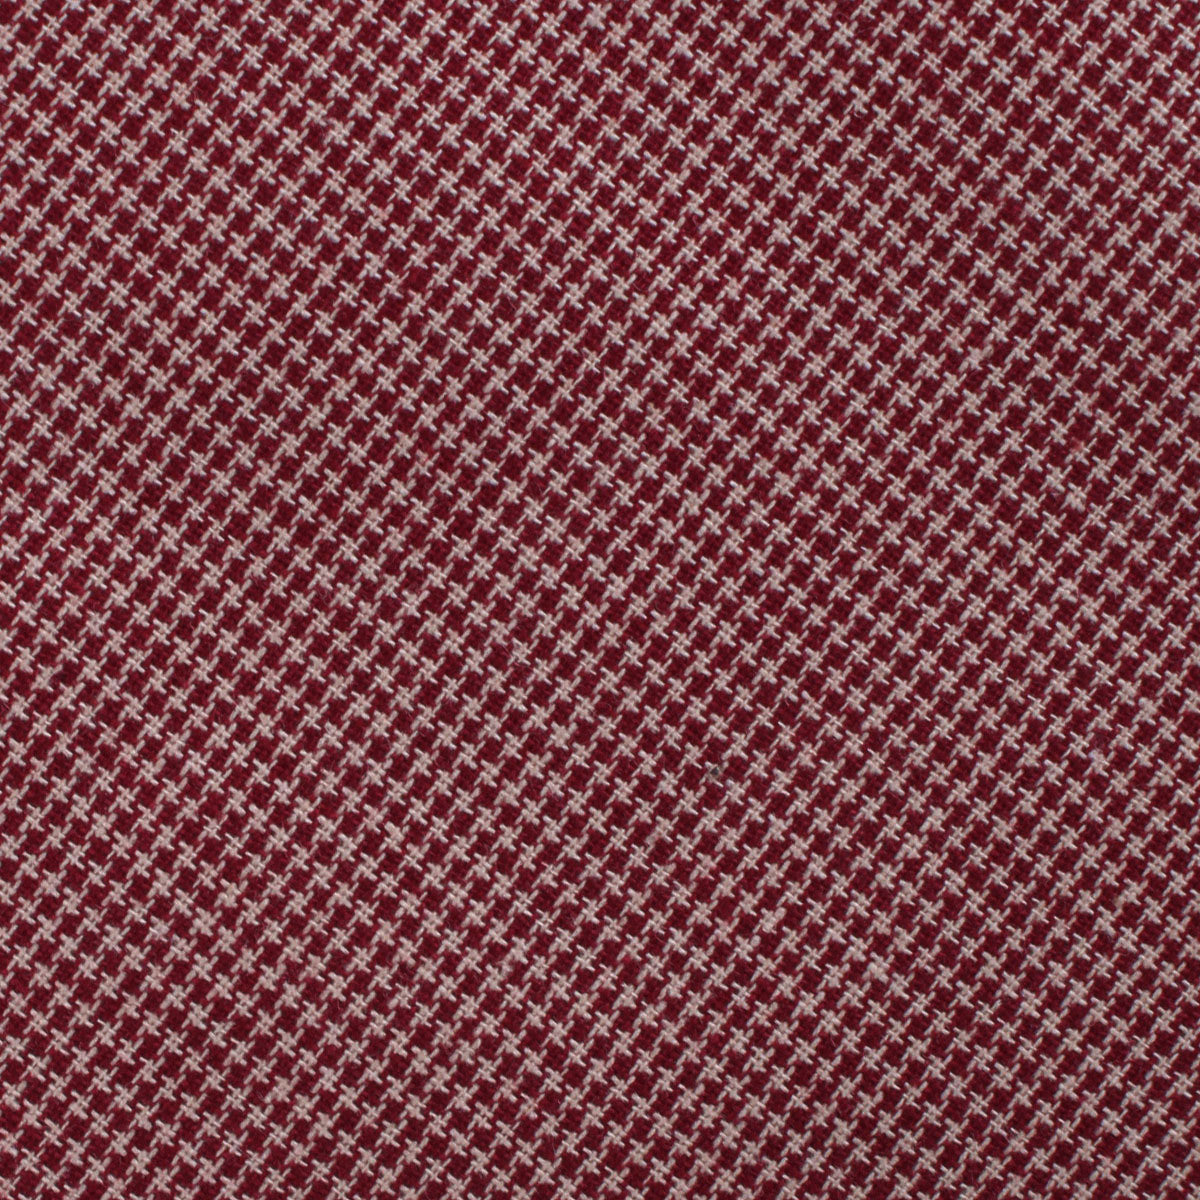 Khaki Red Houndstooth Blend Fabric Pocket Square